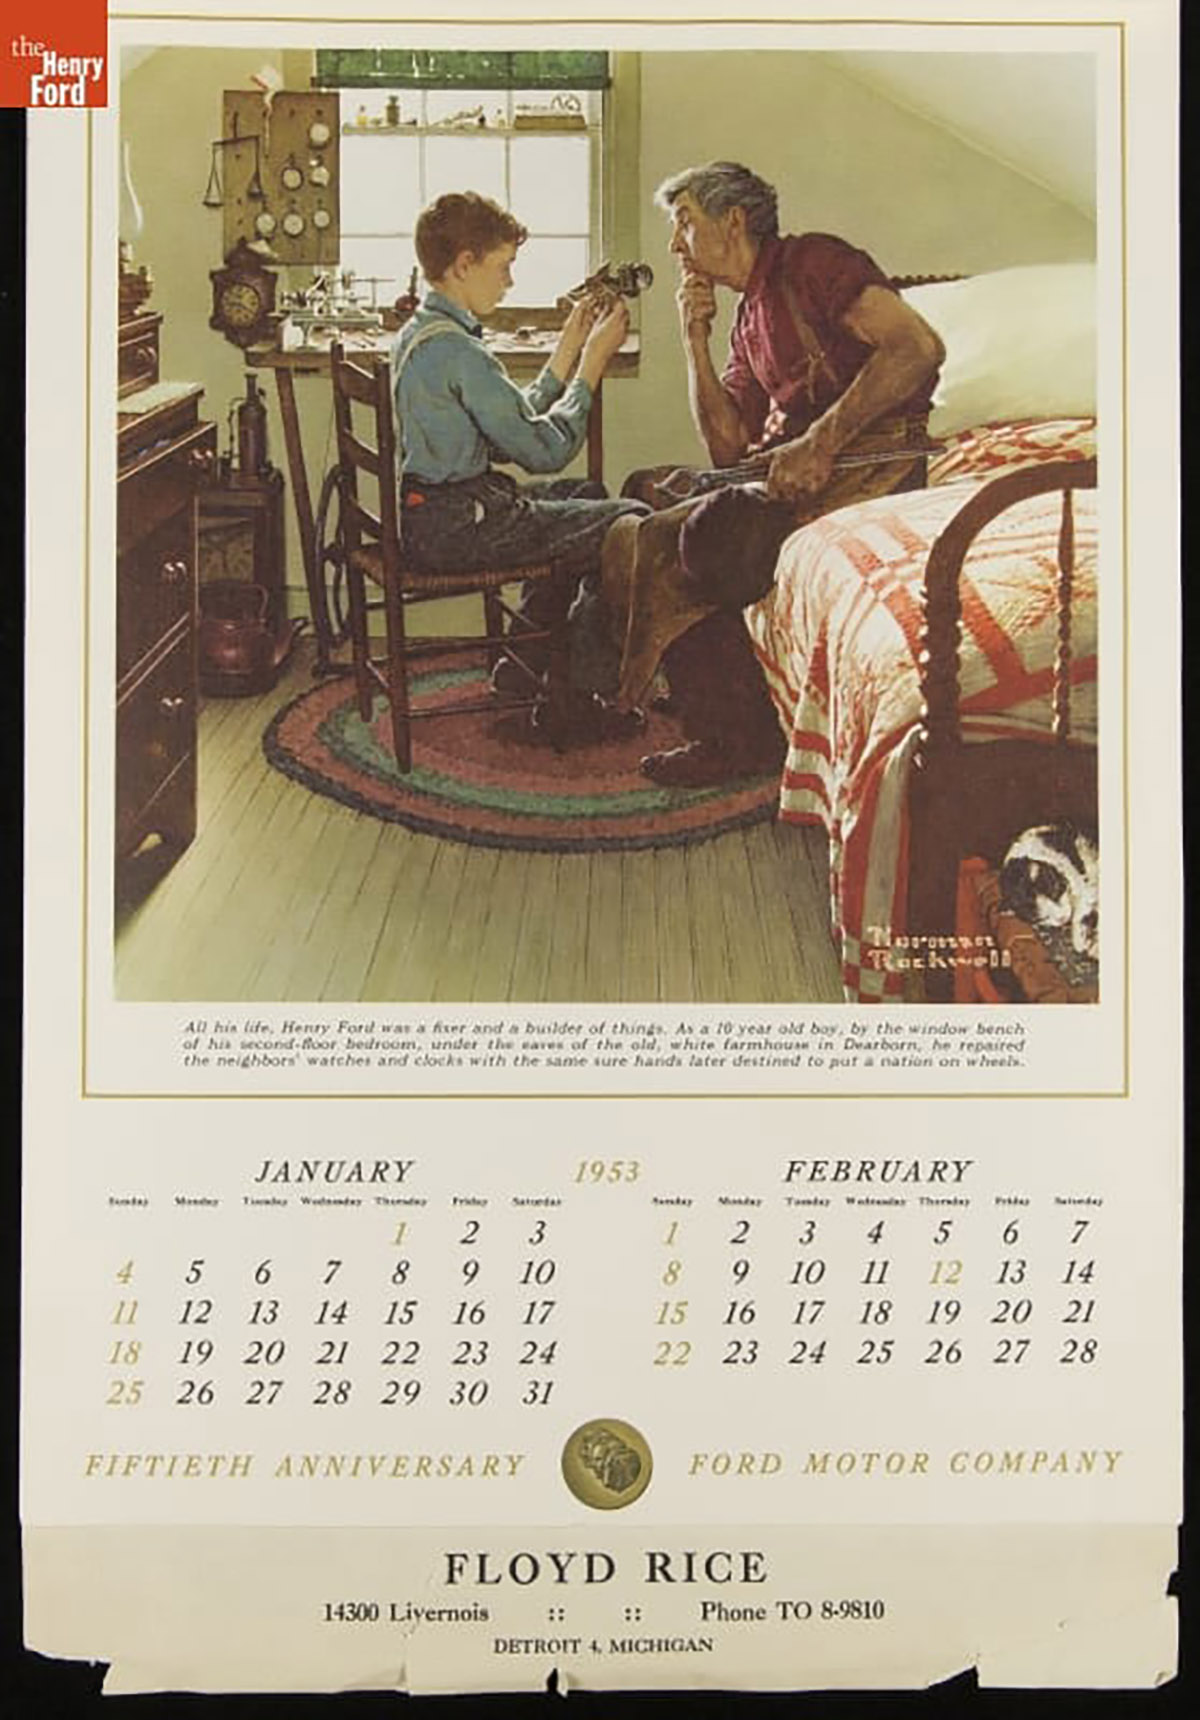 Ford Motor Company Fiftieth Anniversary Calendar, Advertising Ford Dealer Floyd Rice, Detroit, Michigan, 1952-1953. Illustration by Norman Rockwell.